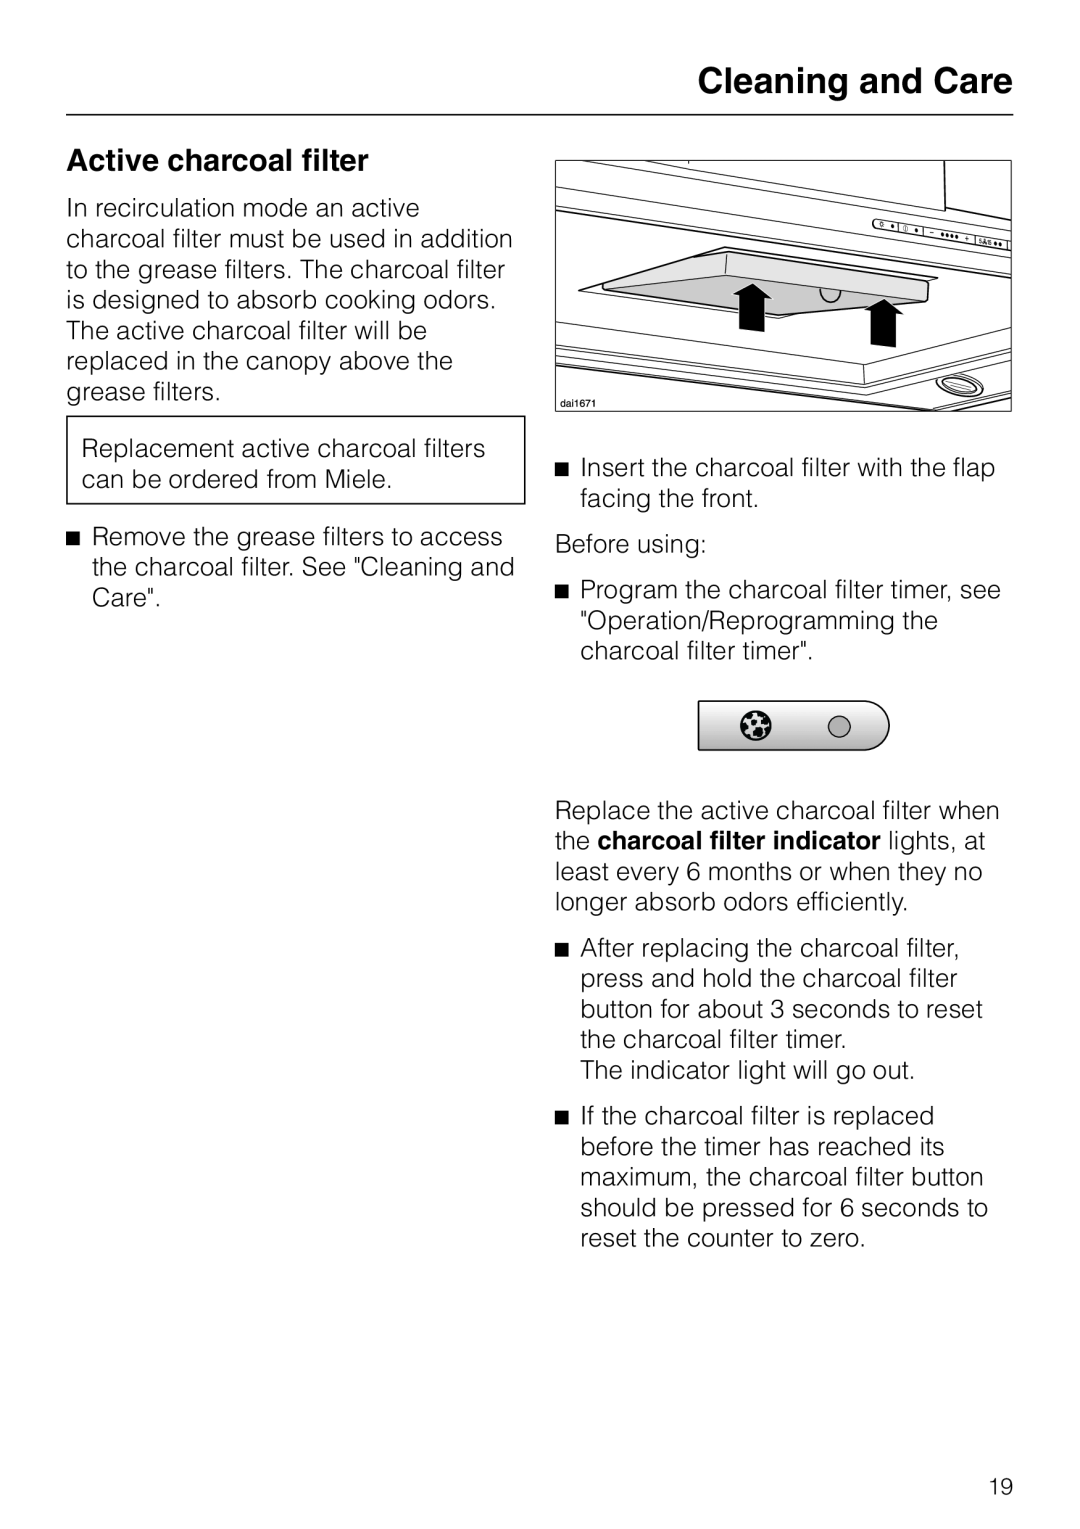 Miele DA403 installation instructions Active charcoal filter, Cleaning and Care 